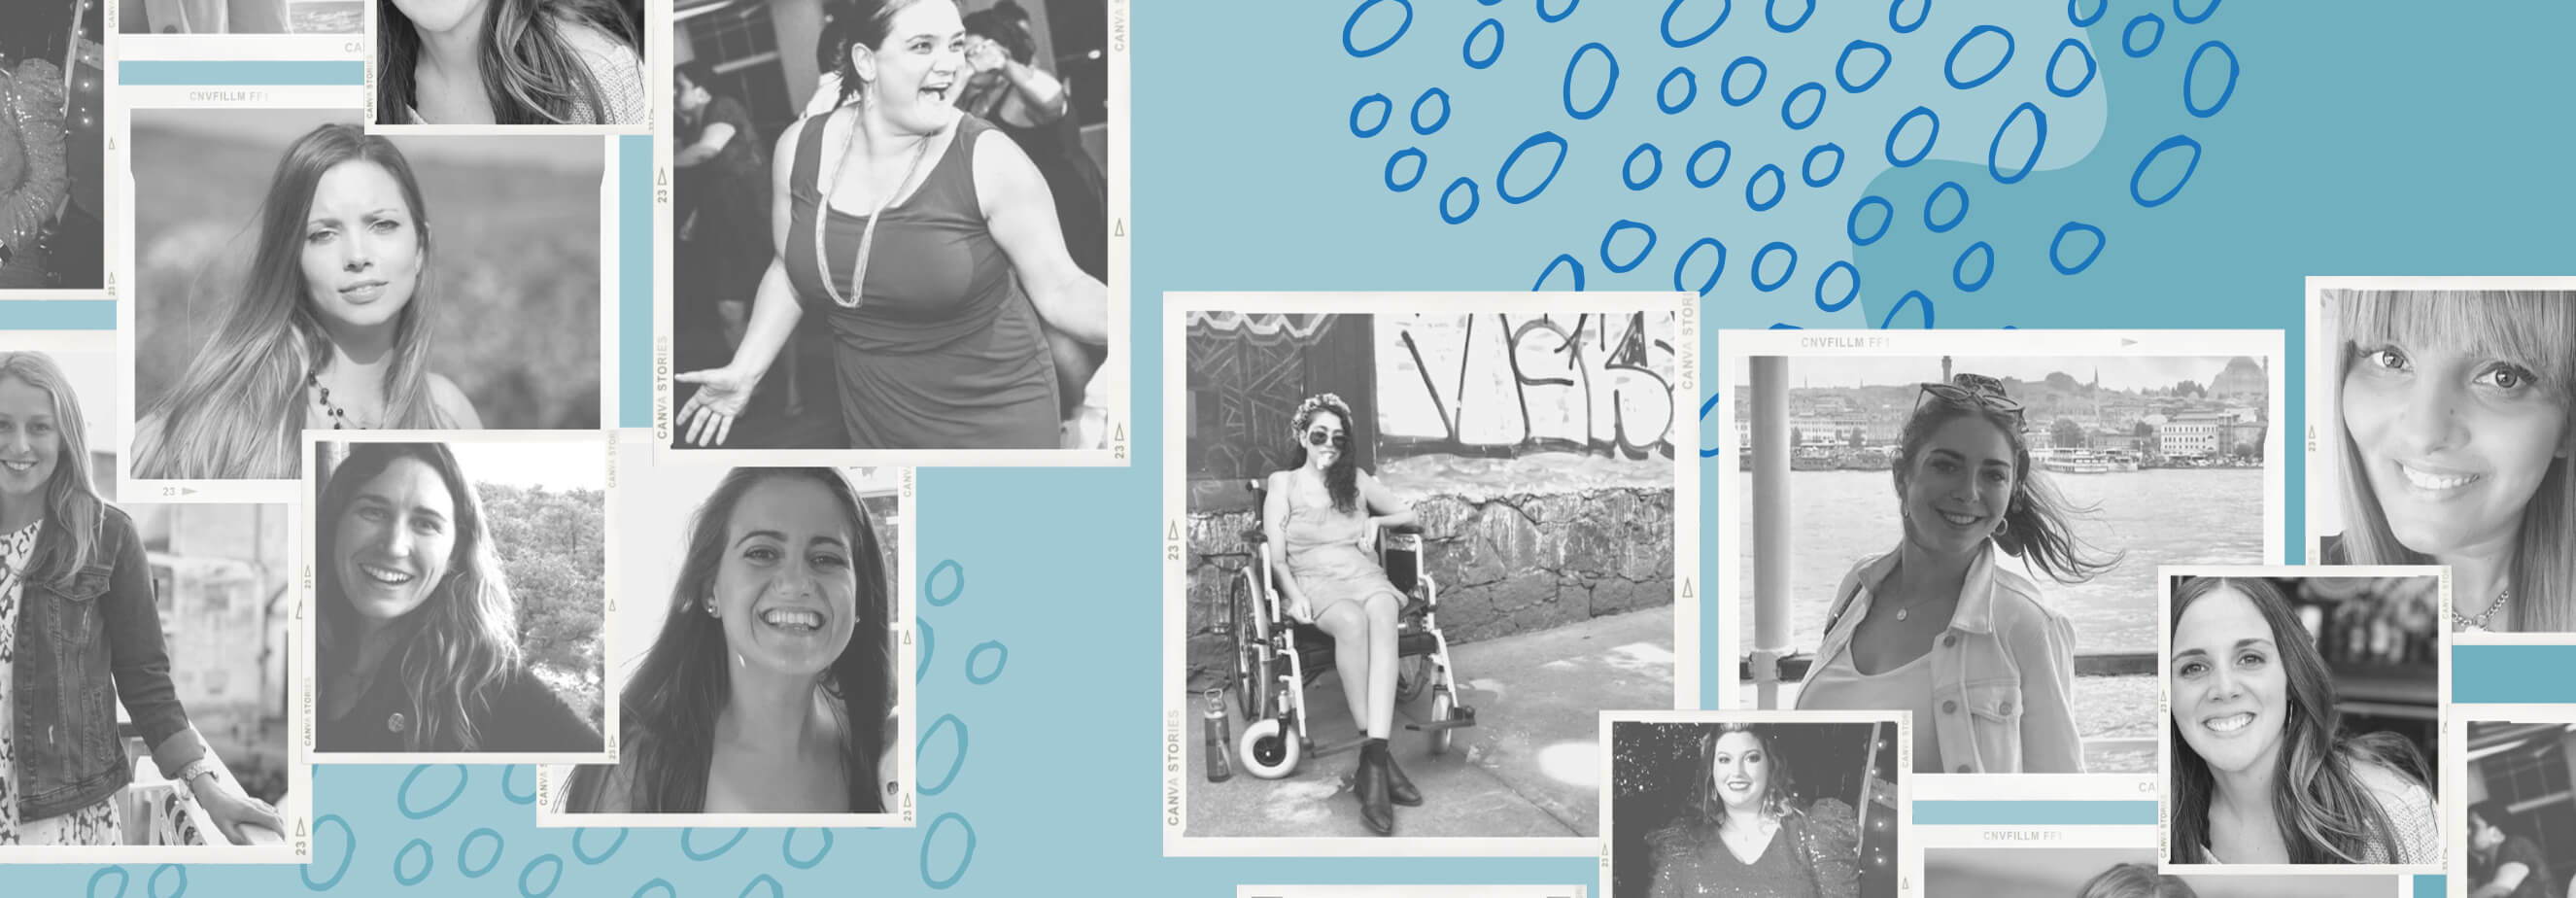 A collage of images showing the women behind Her ALS Story